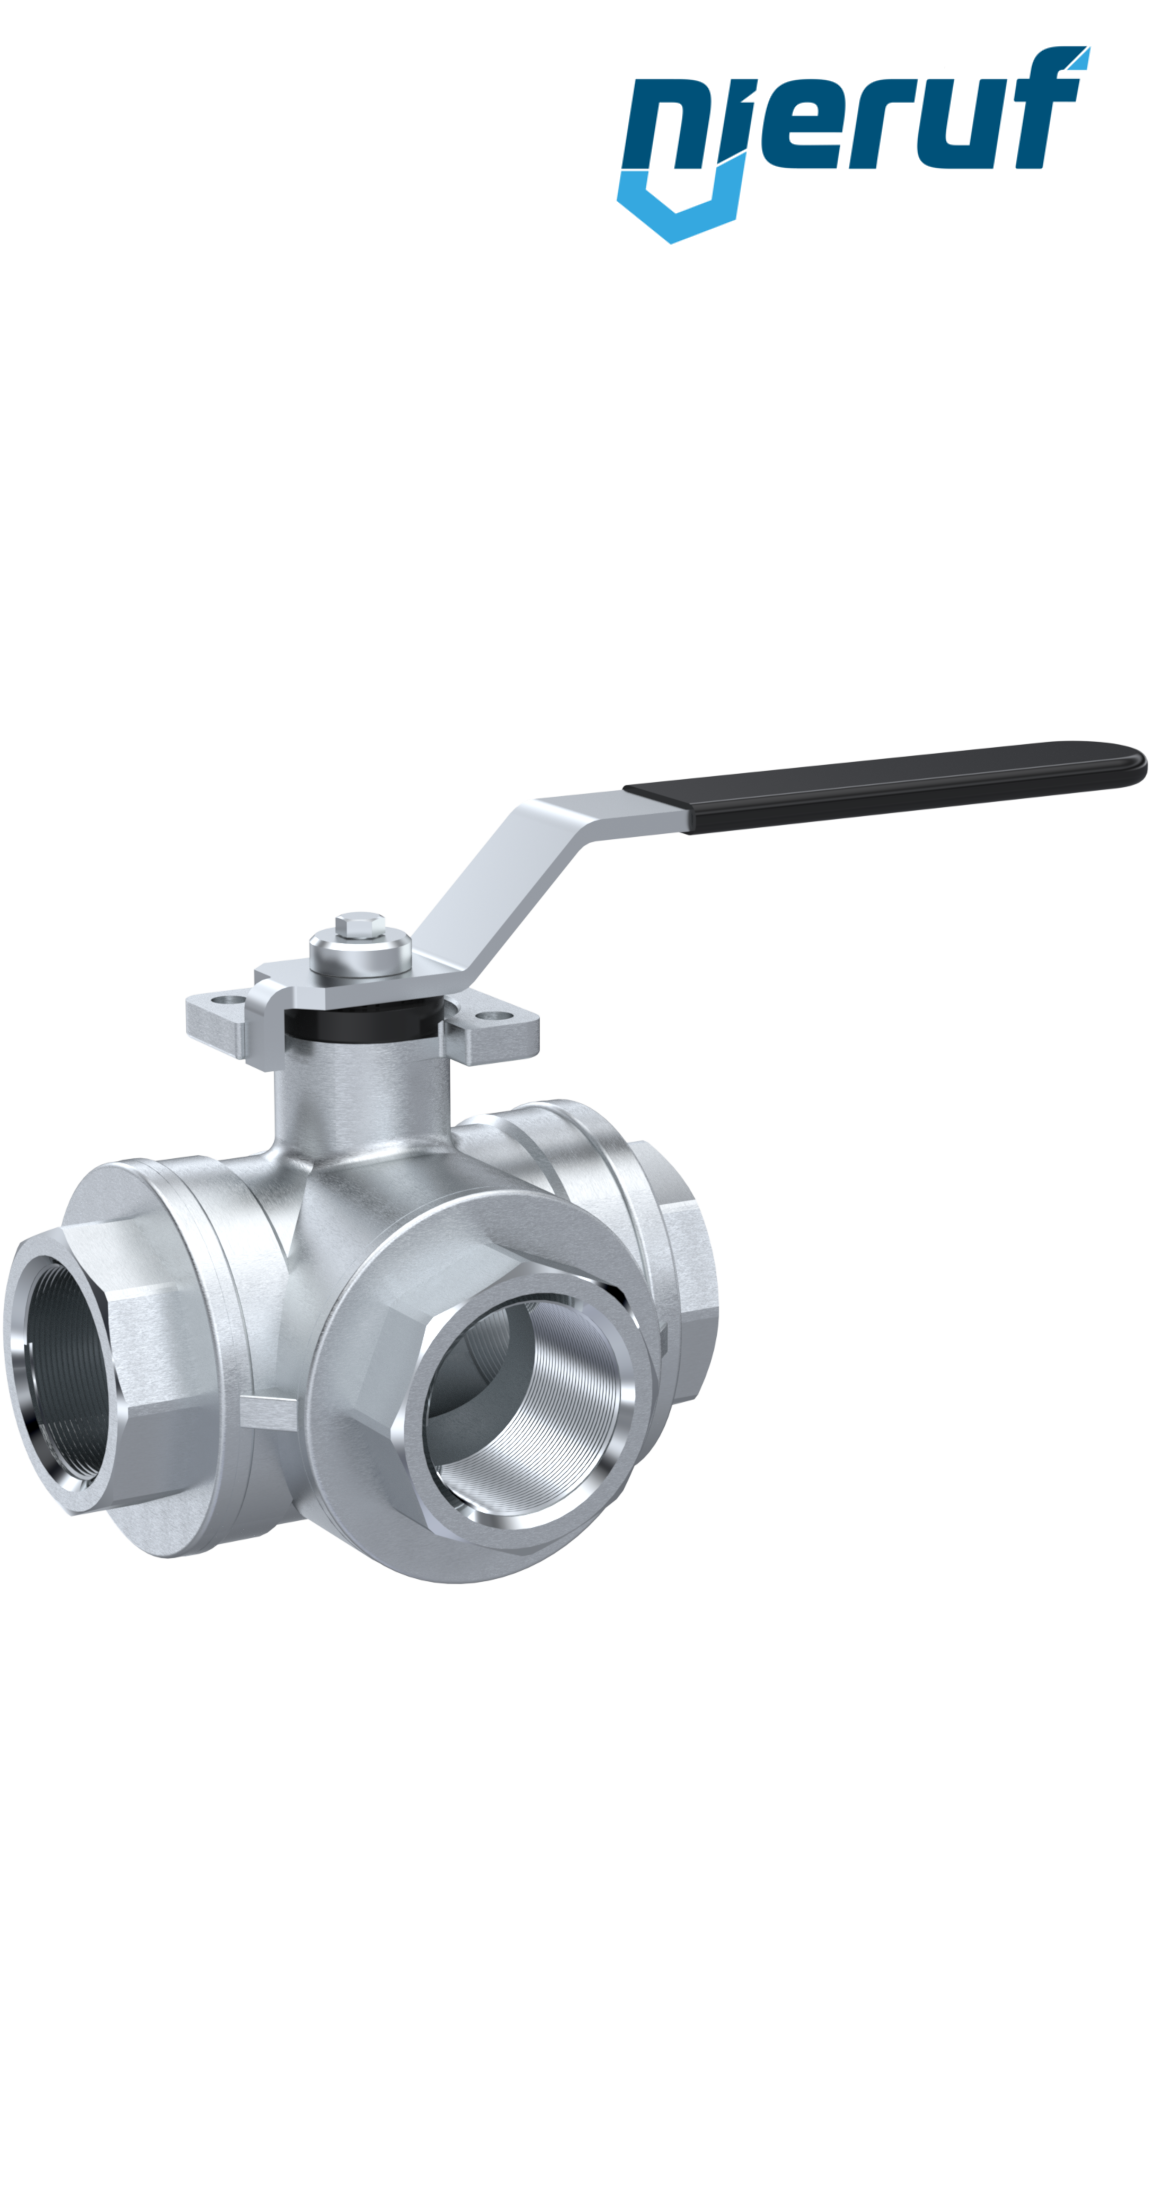 3  way brass ball valve DN20 - 3/4" inch GK08 full port design with T drilling